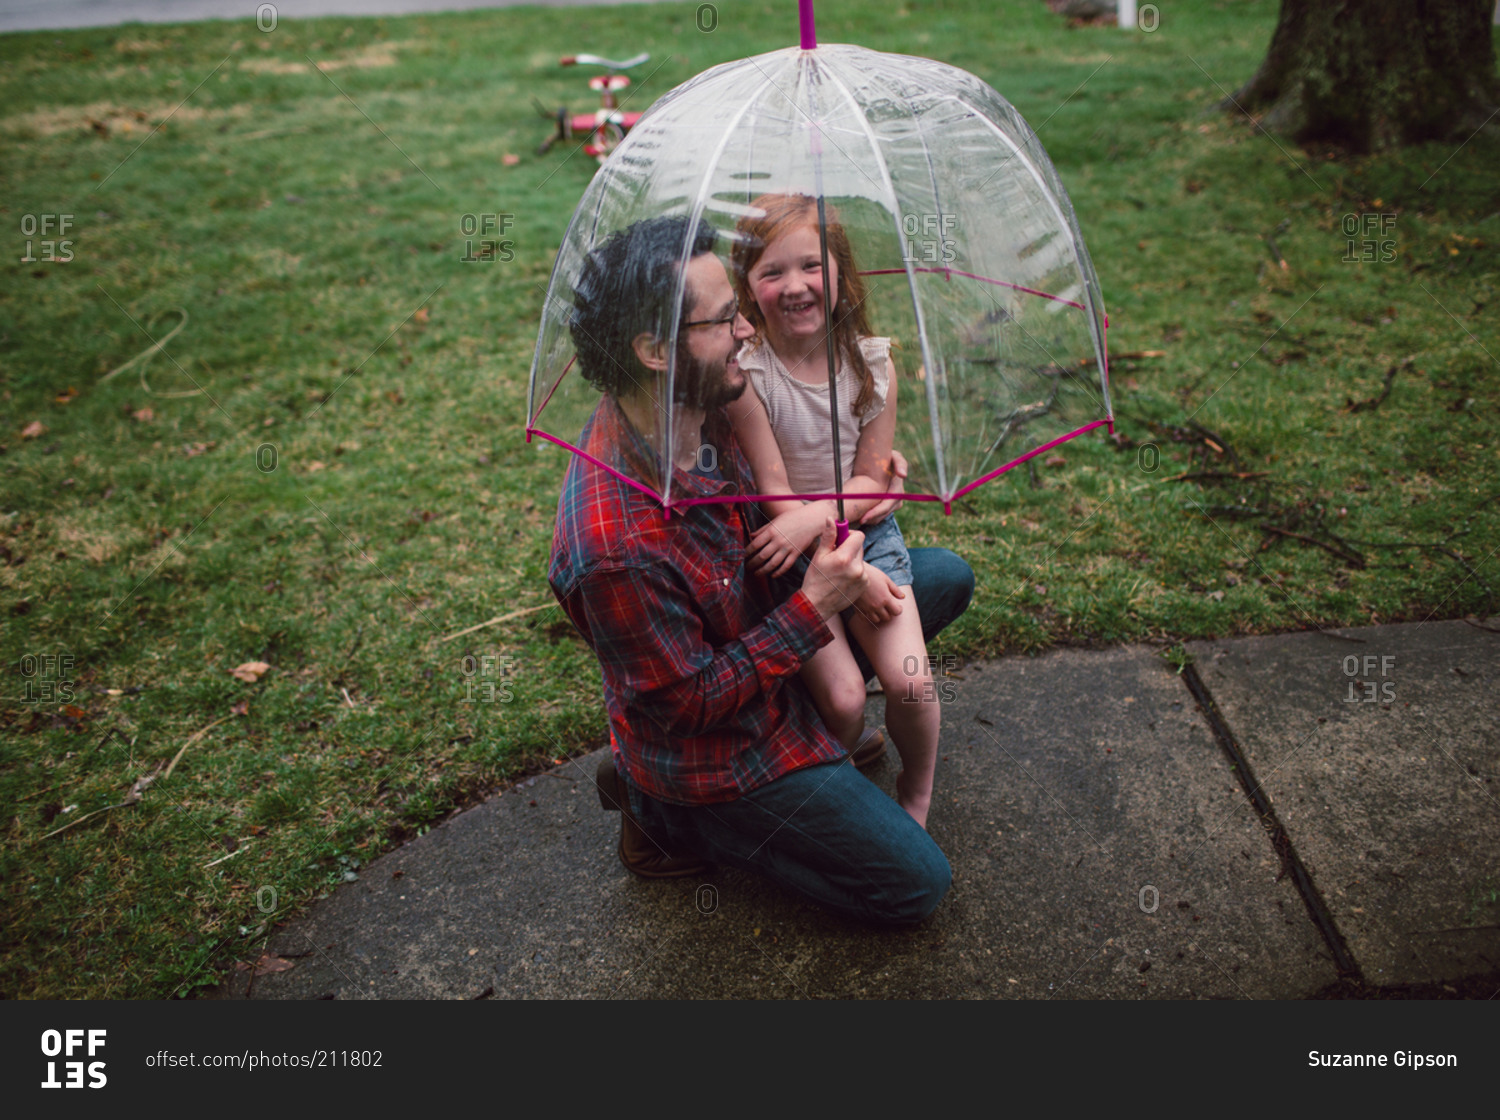 A little girl and her dad giggle under a bucket umbrella